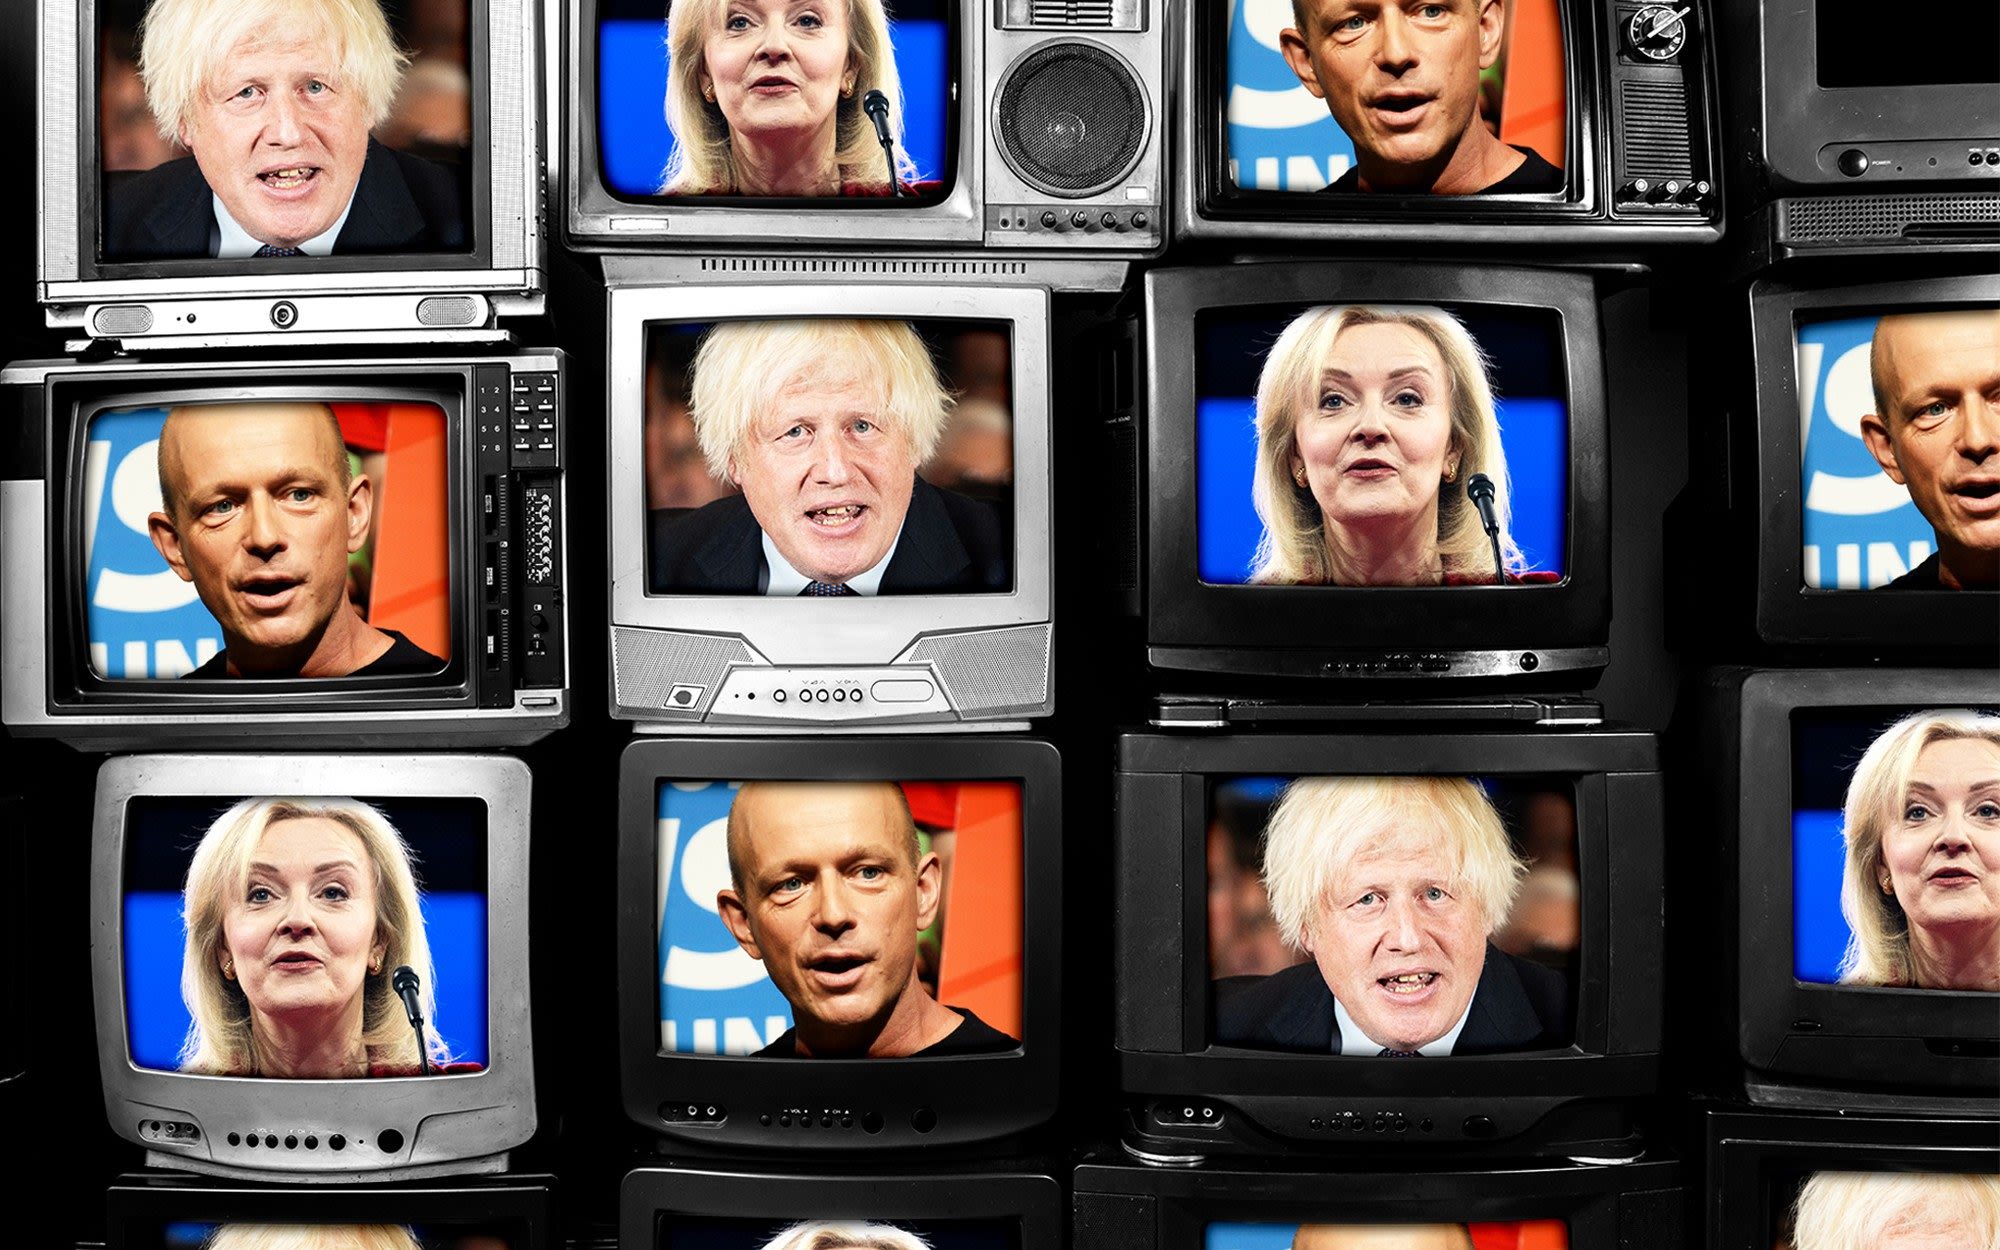 Why ousted British Tories have become Fox News regulars